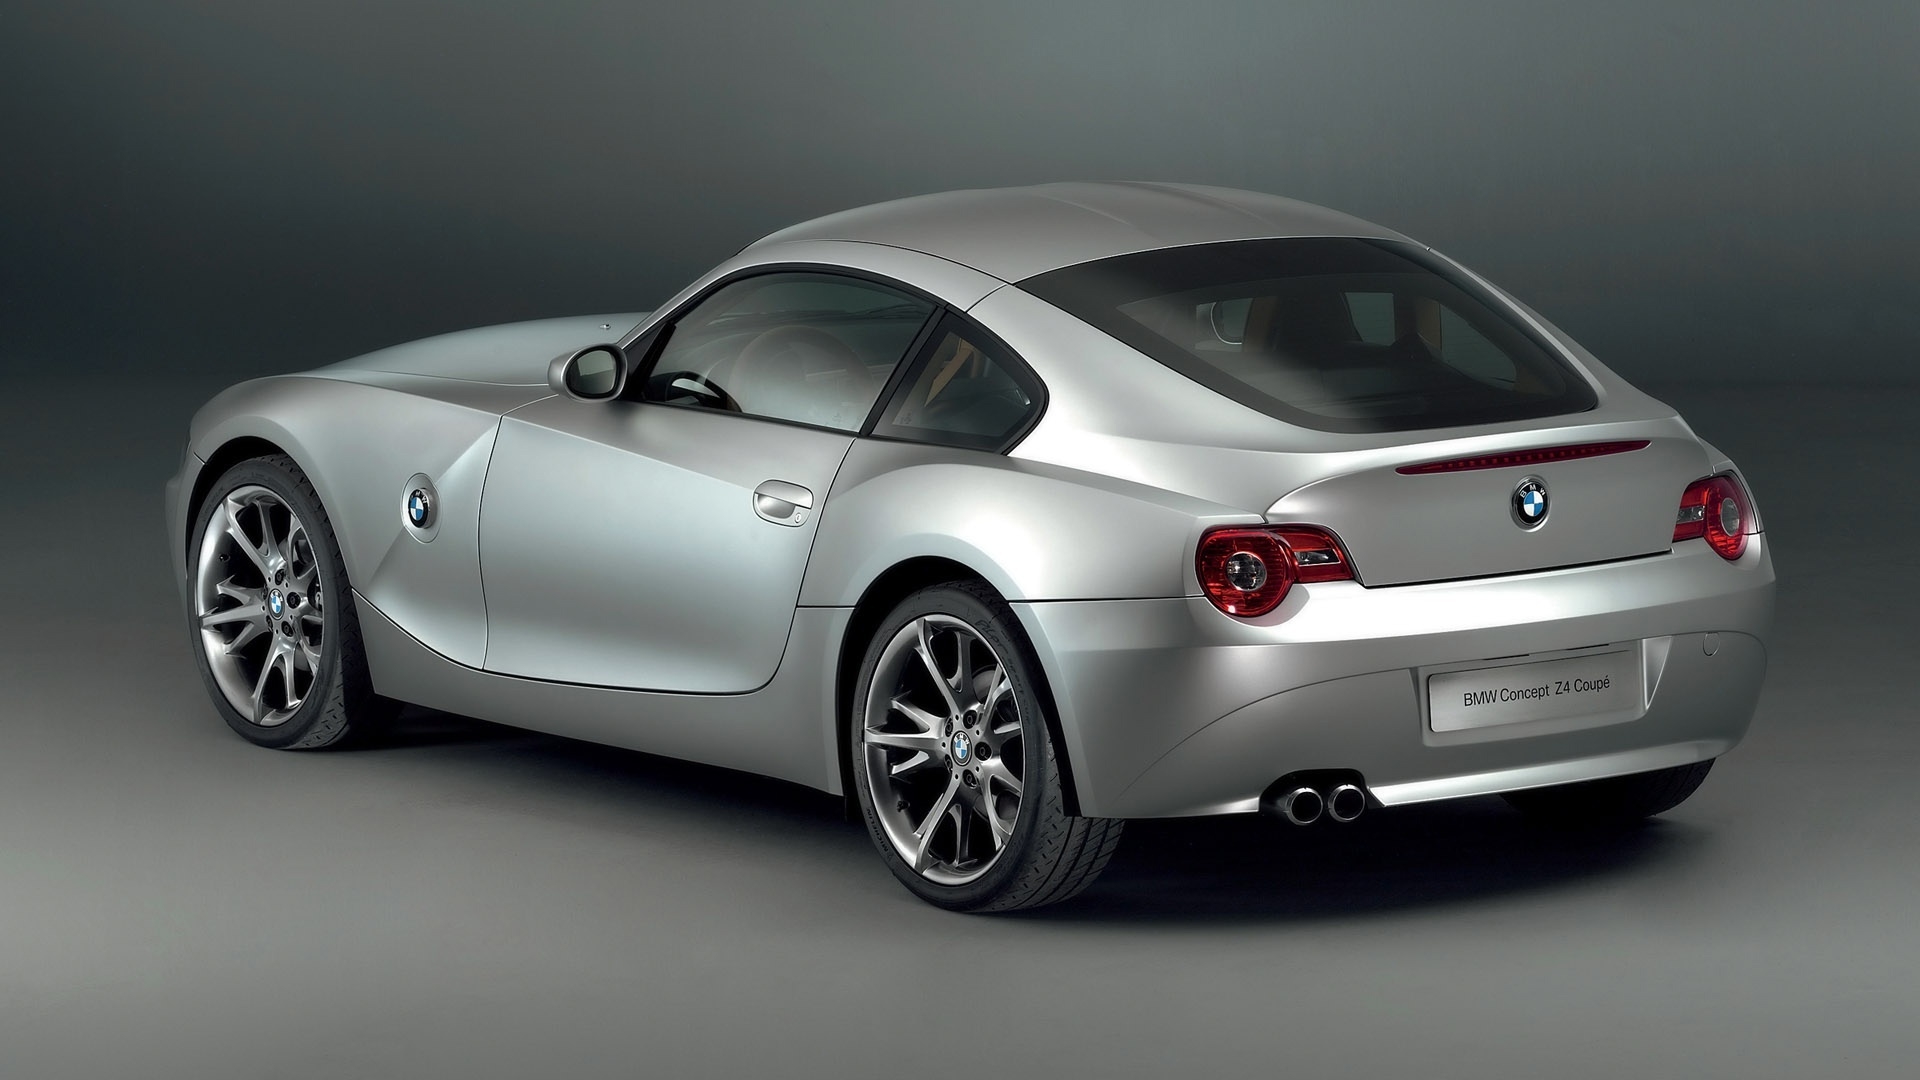 BMW Z4 Coupe Concept RA 2005 for 1920 x 1080 HDTV 1080p resolution